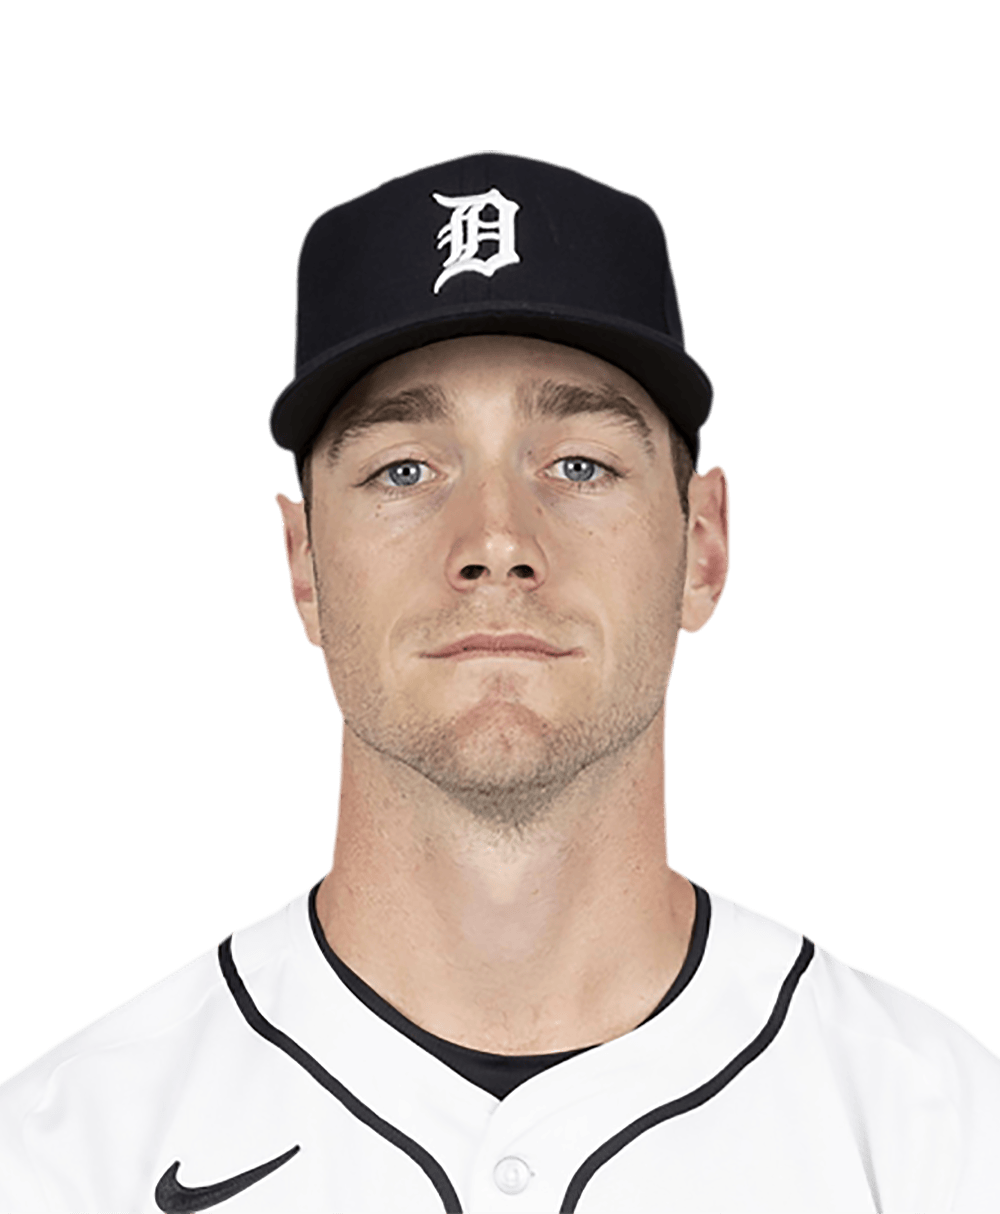 Tigers pitcher Joey Wentz's strong fall could lead to spot in 2023